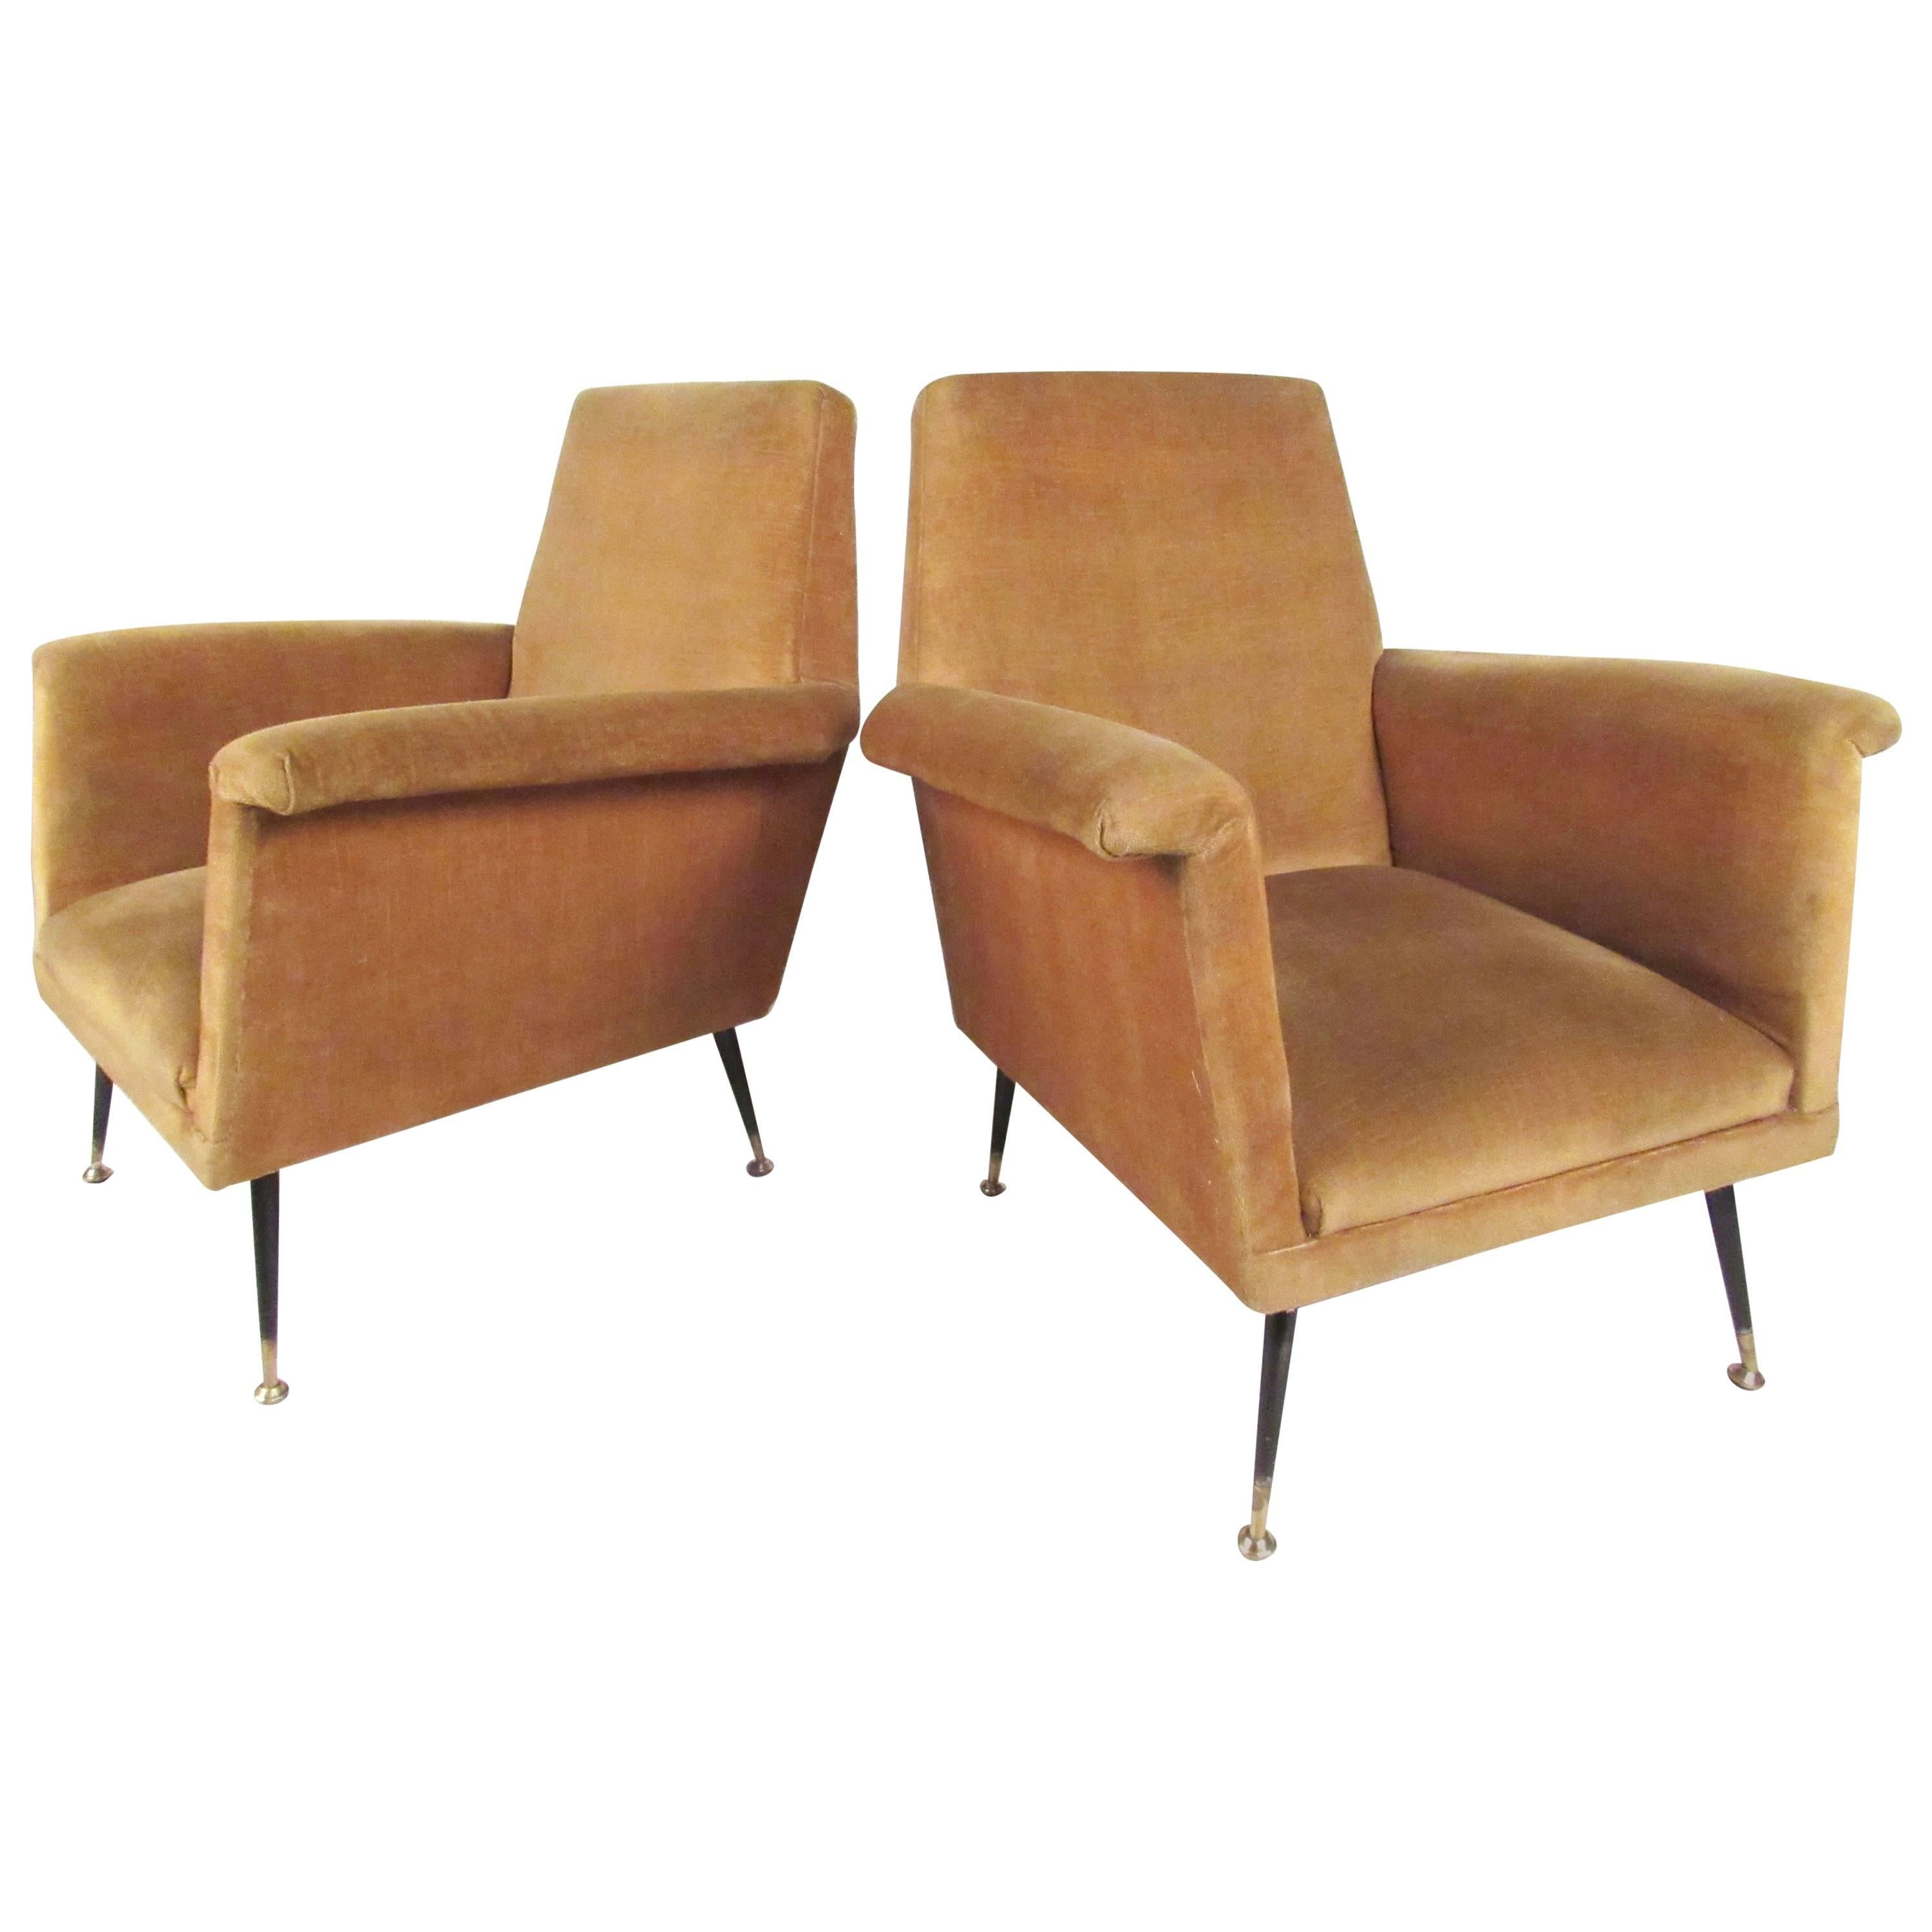 Pair of Italian Modern Lounge Chairs in the Style of Marco Zanuso